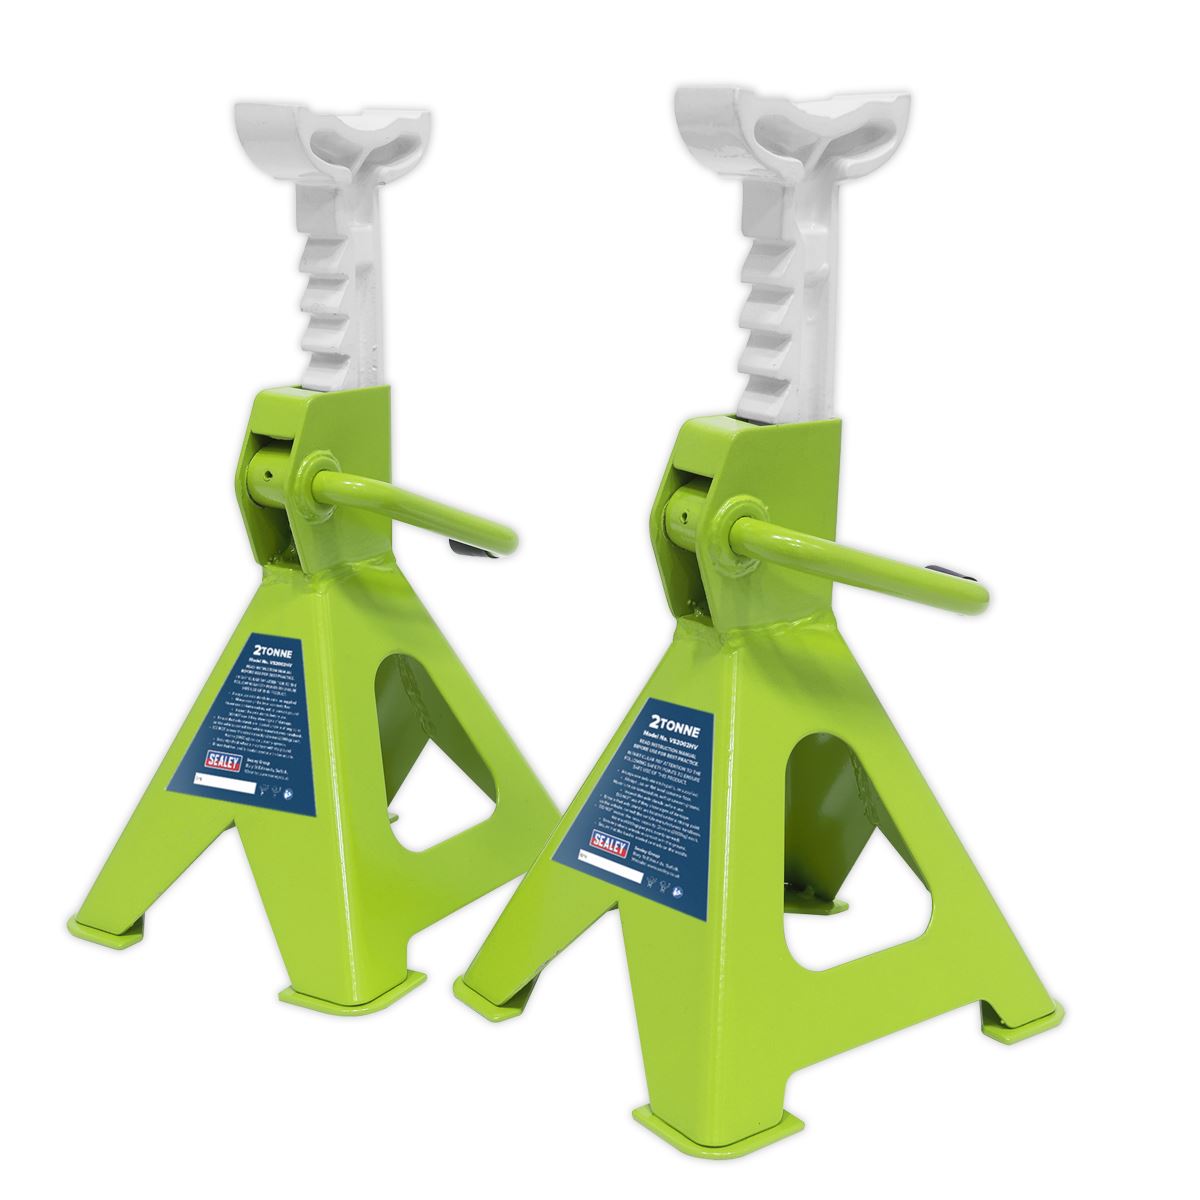 Sealey Ratchet Type Axle Stands (Pair) 2 Tonne Capacity per Stand - Hi-Vis Green